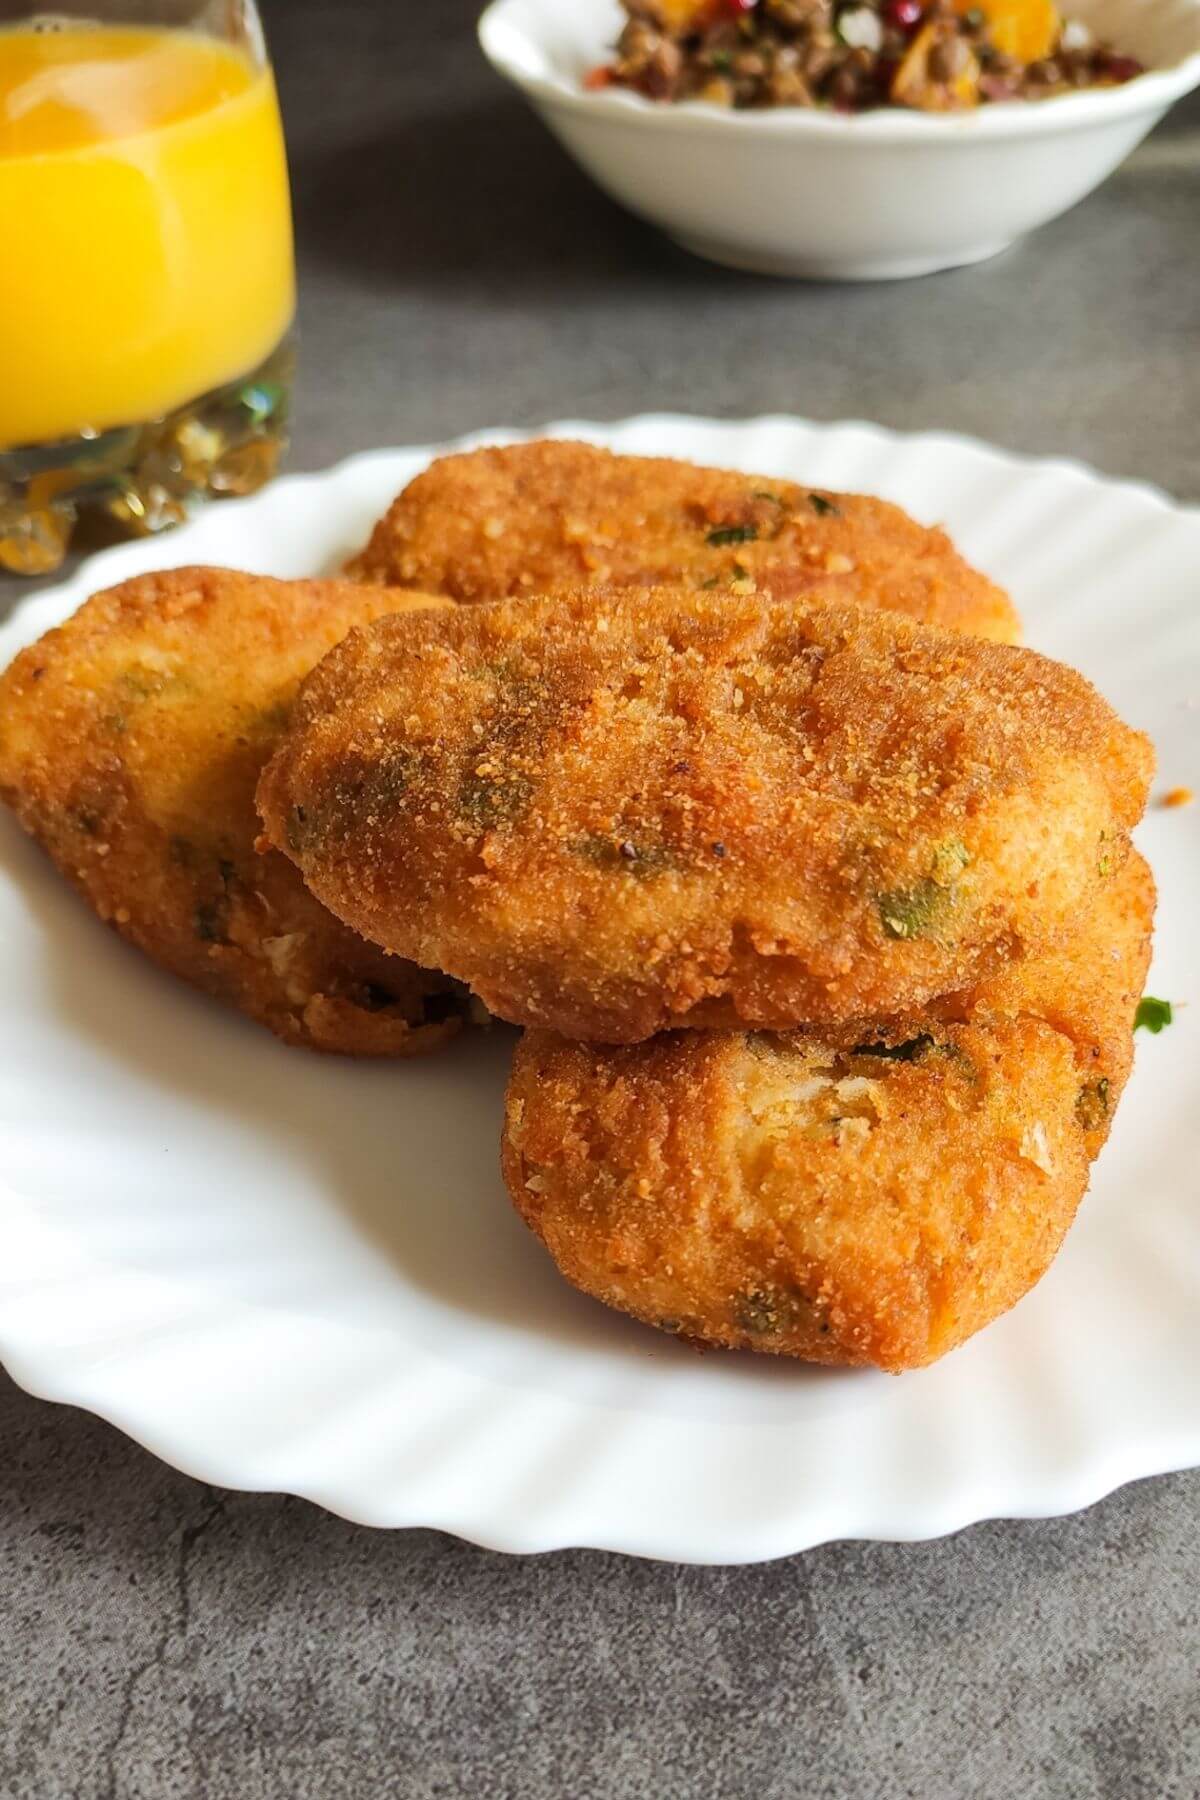 chickpea cutlets on a white plate with a glass of juice.